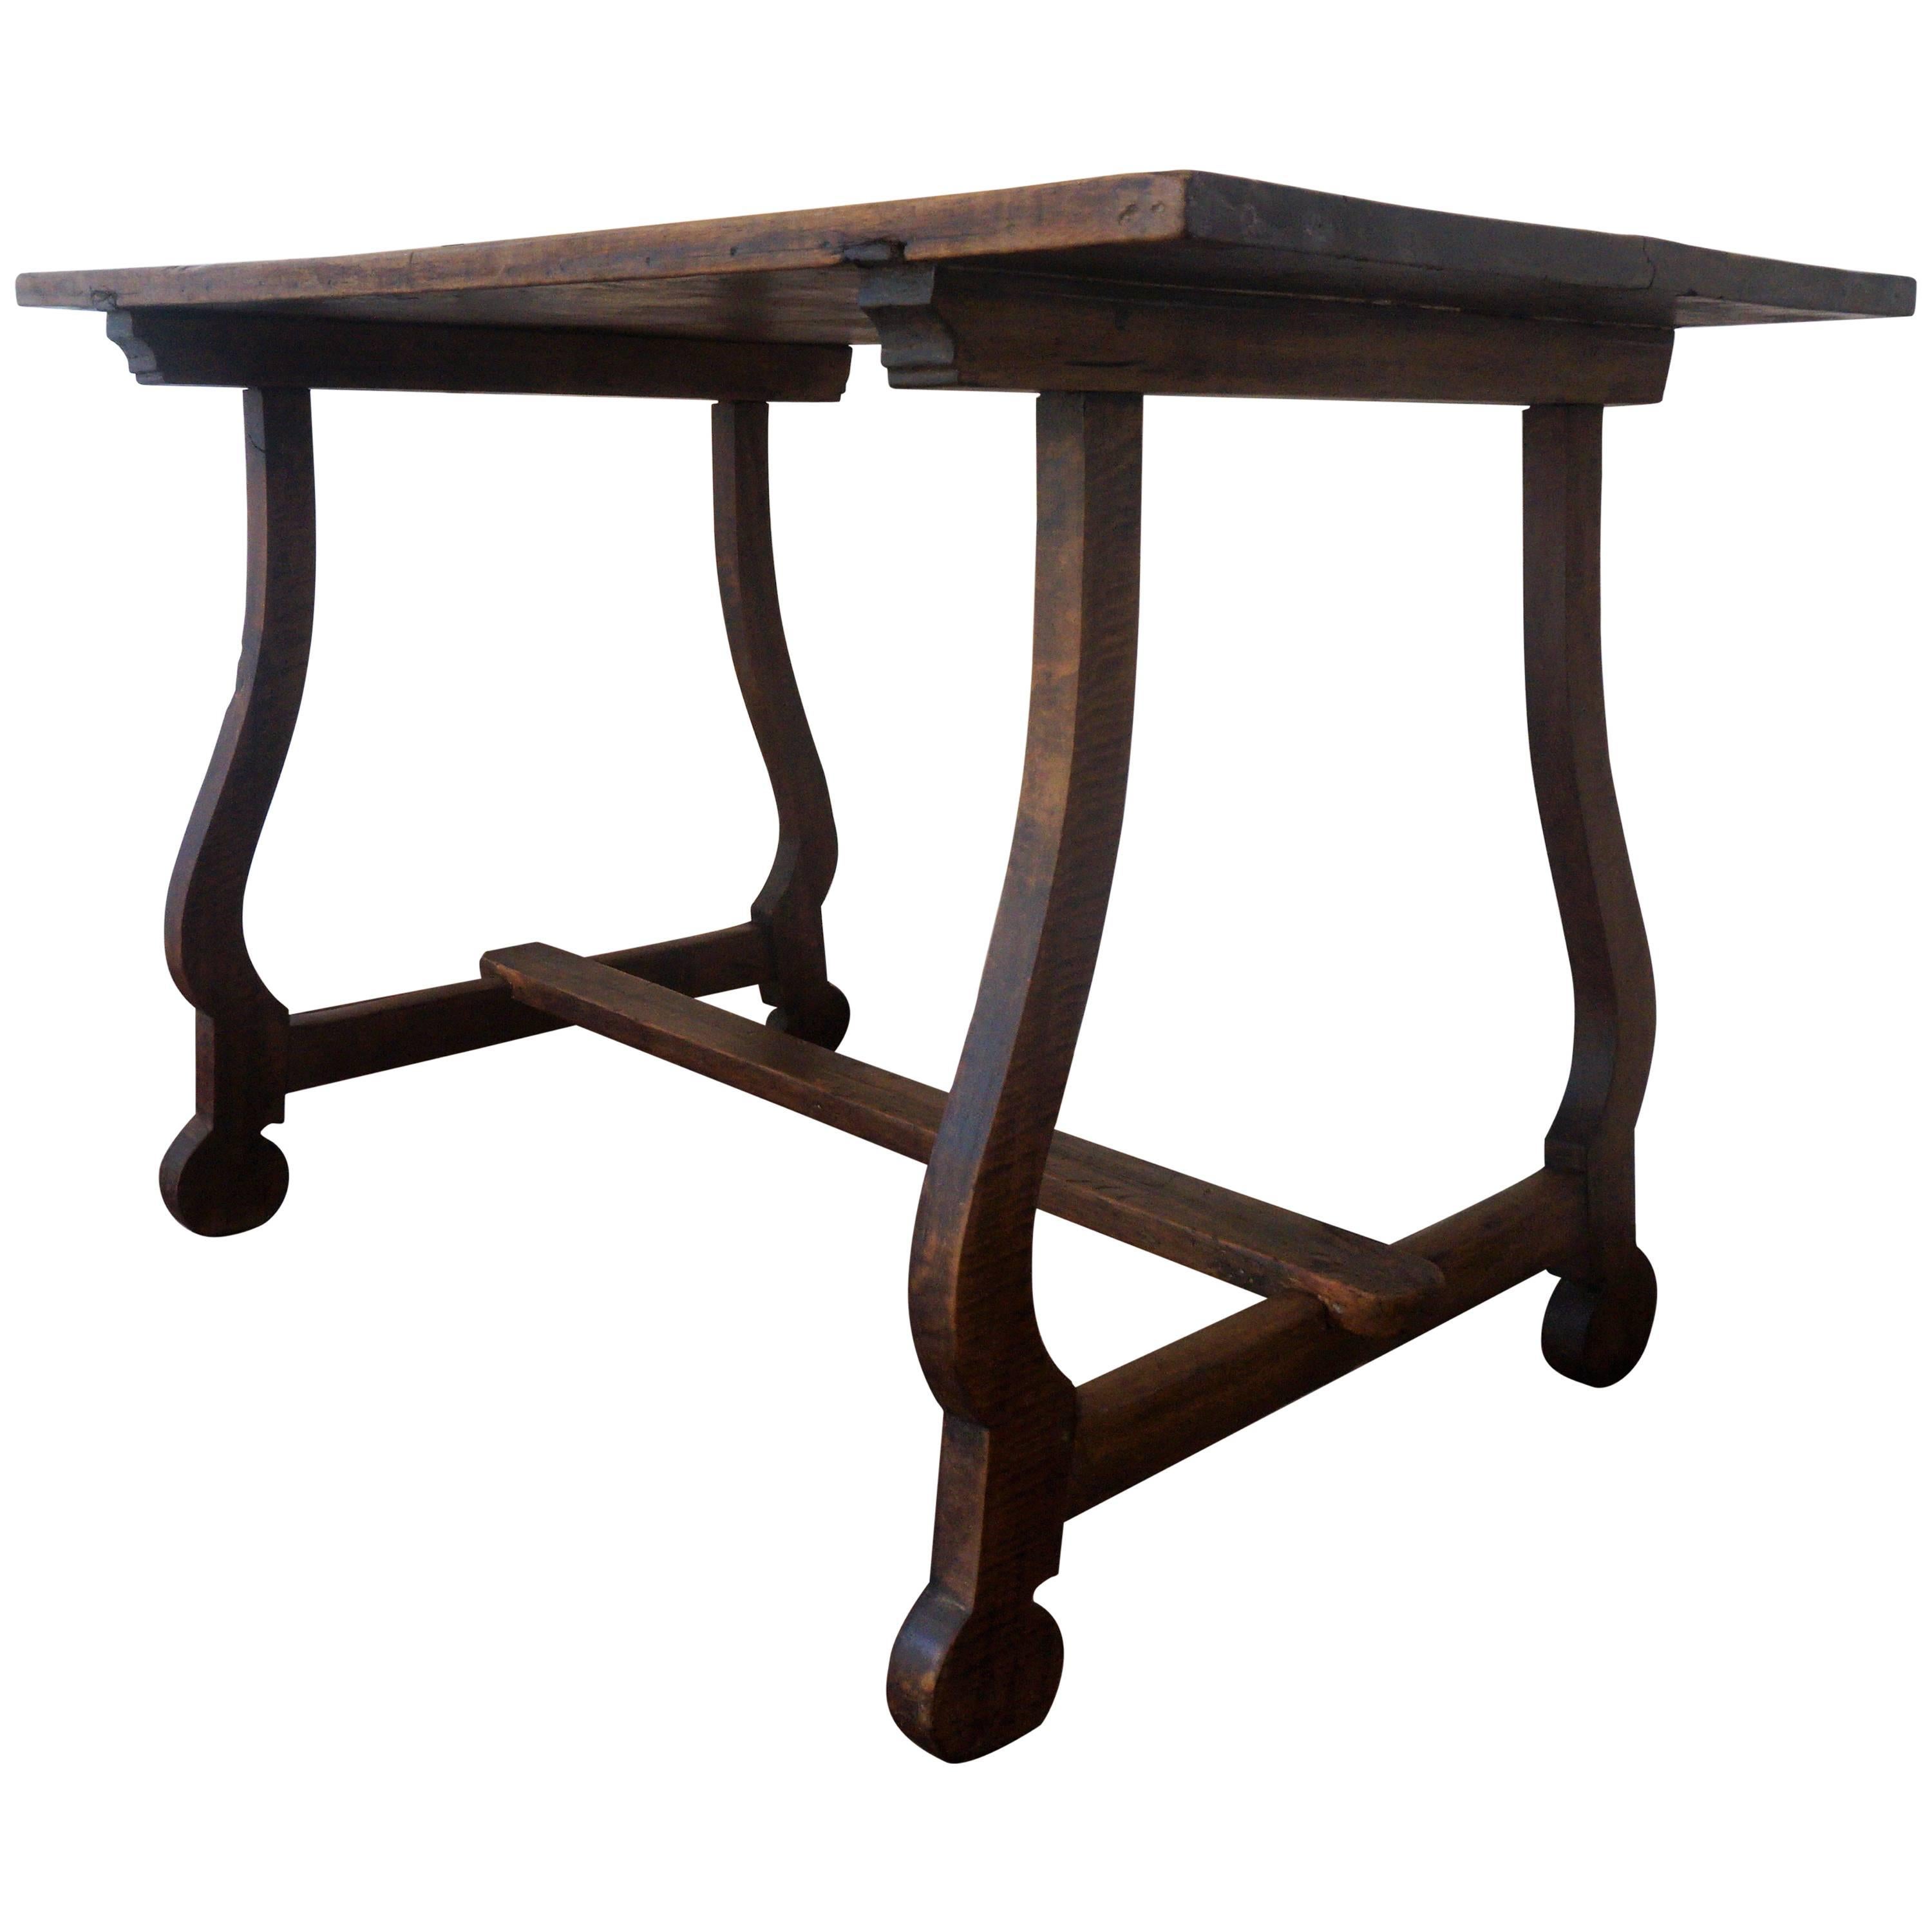 19th Century Spanish Baroque Trestle-Refectory Table on Lyre-Shaped Legs